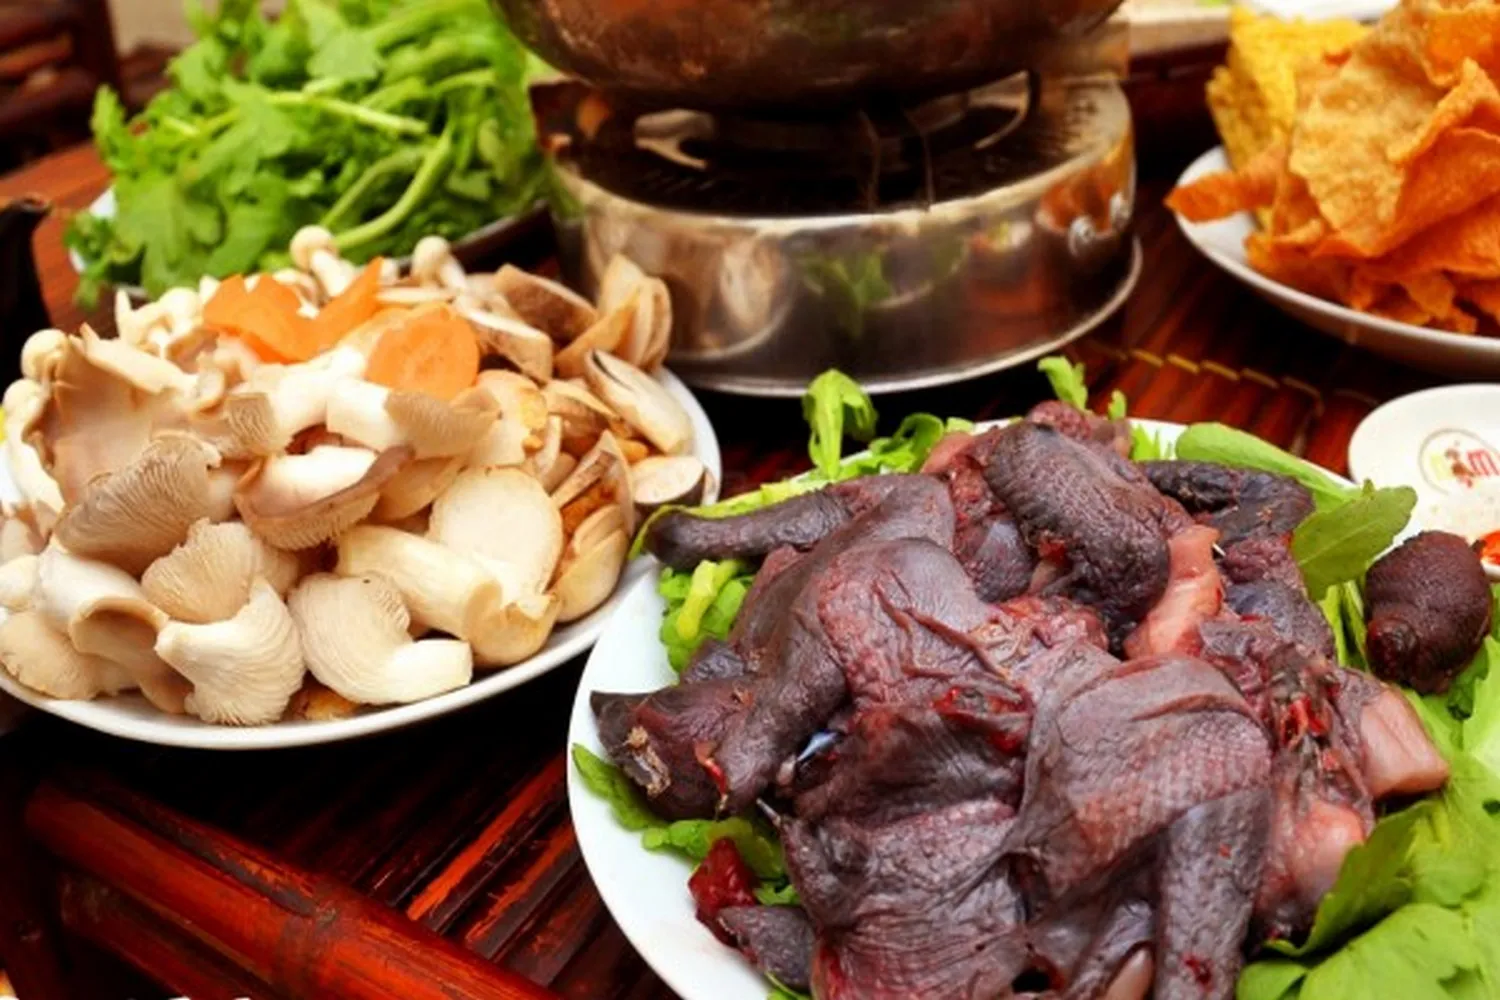 Black chicken hotpot is chosen by many tourists